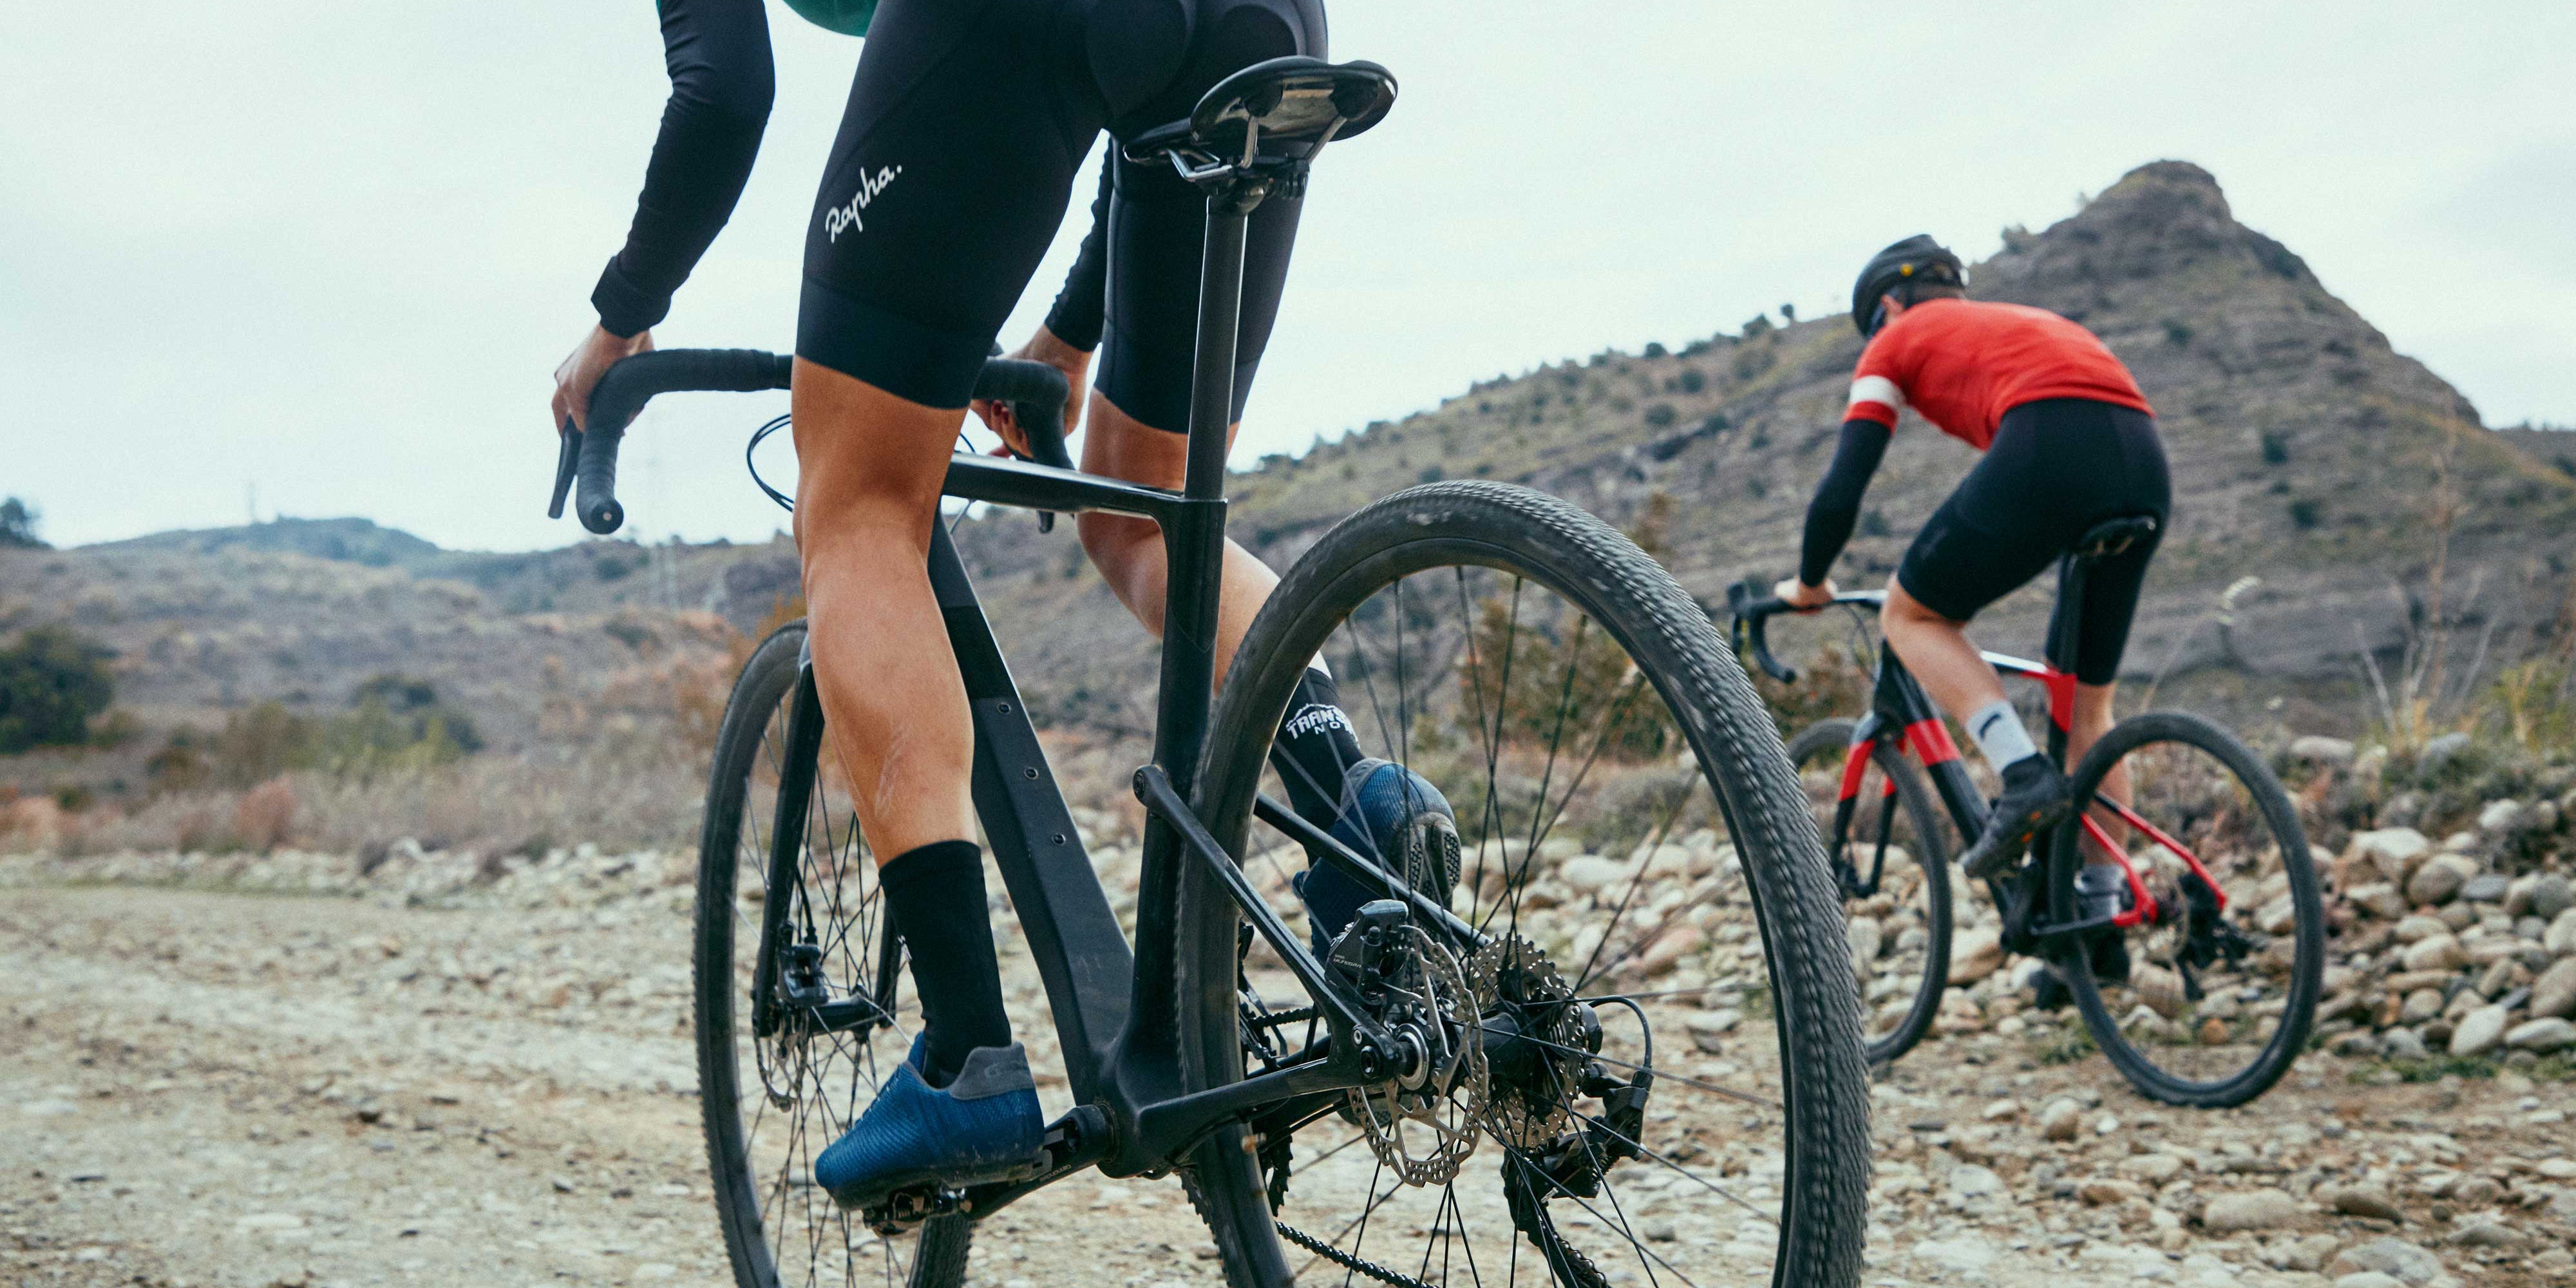 Cyclist in black attire riding a gravel bike on a rocky desert trail, followed by another in the background @ Bici.